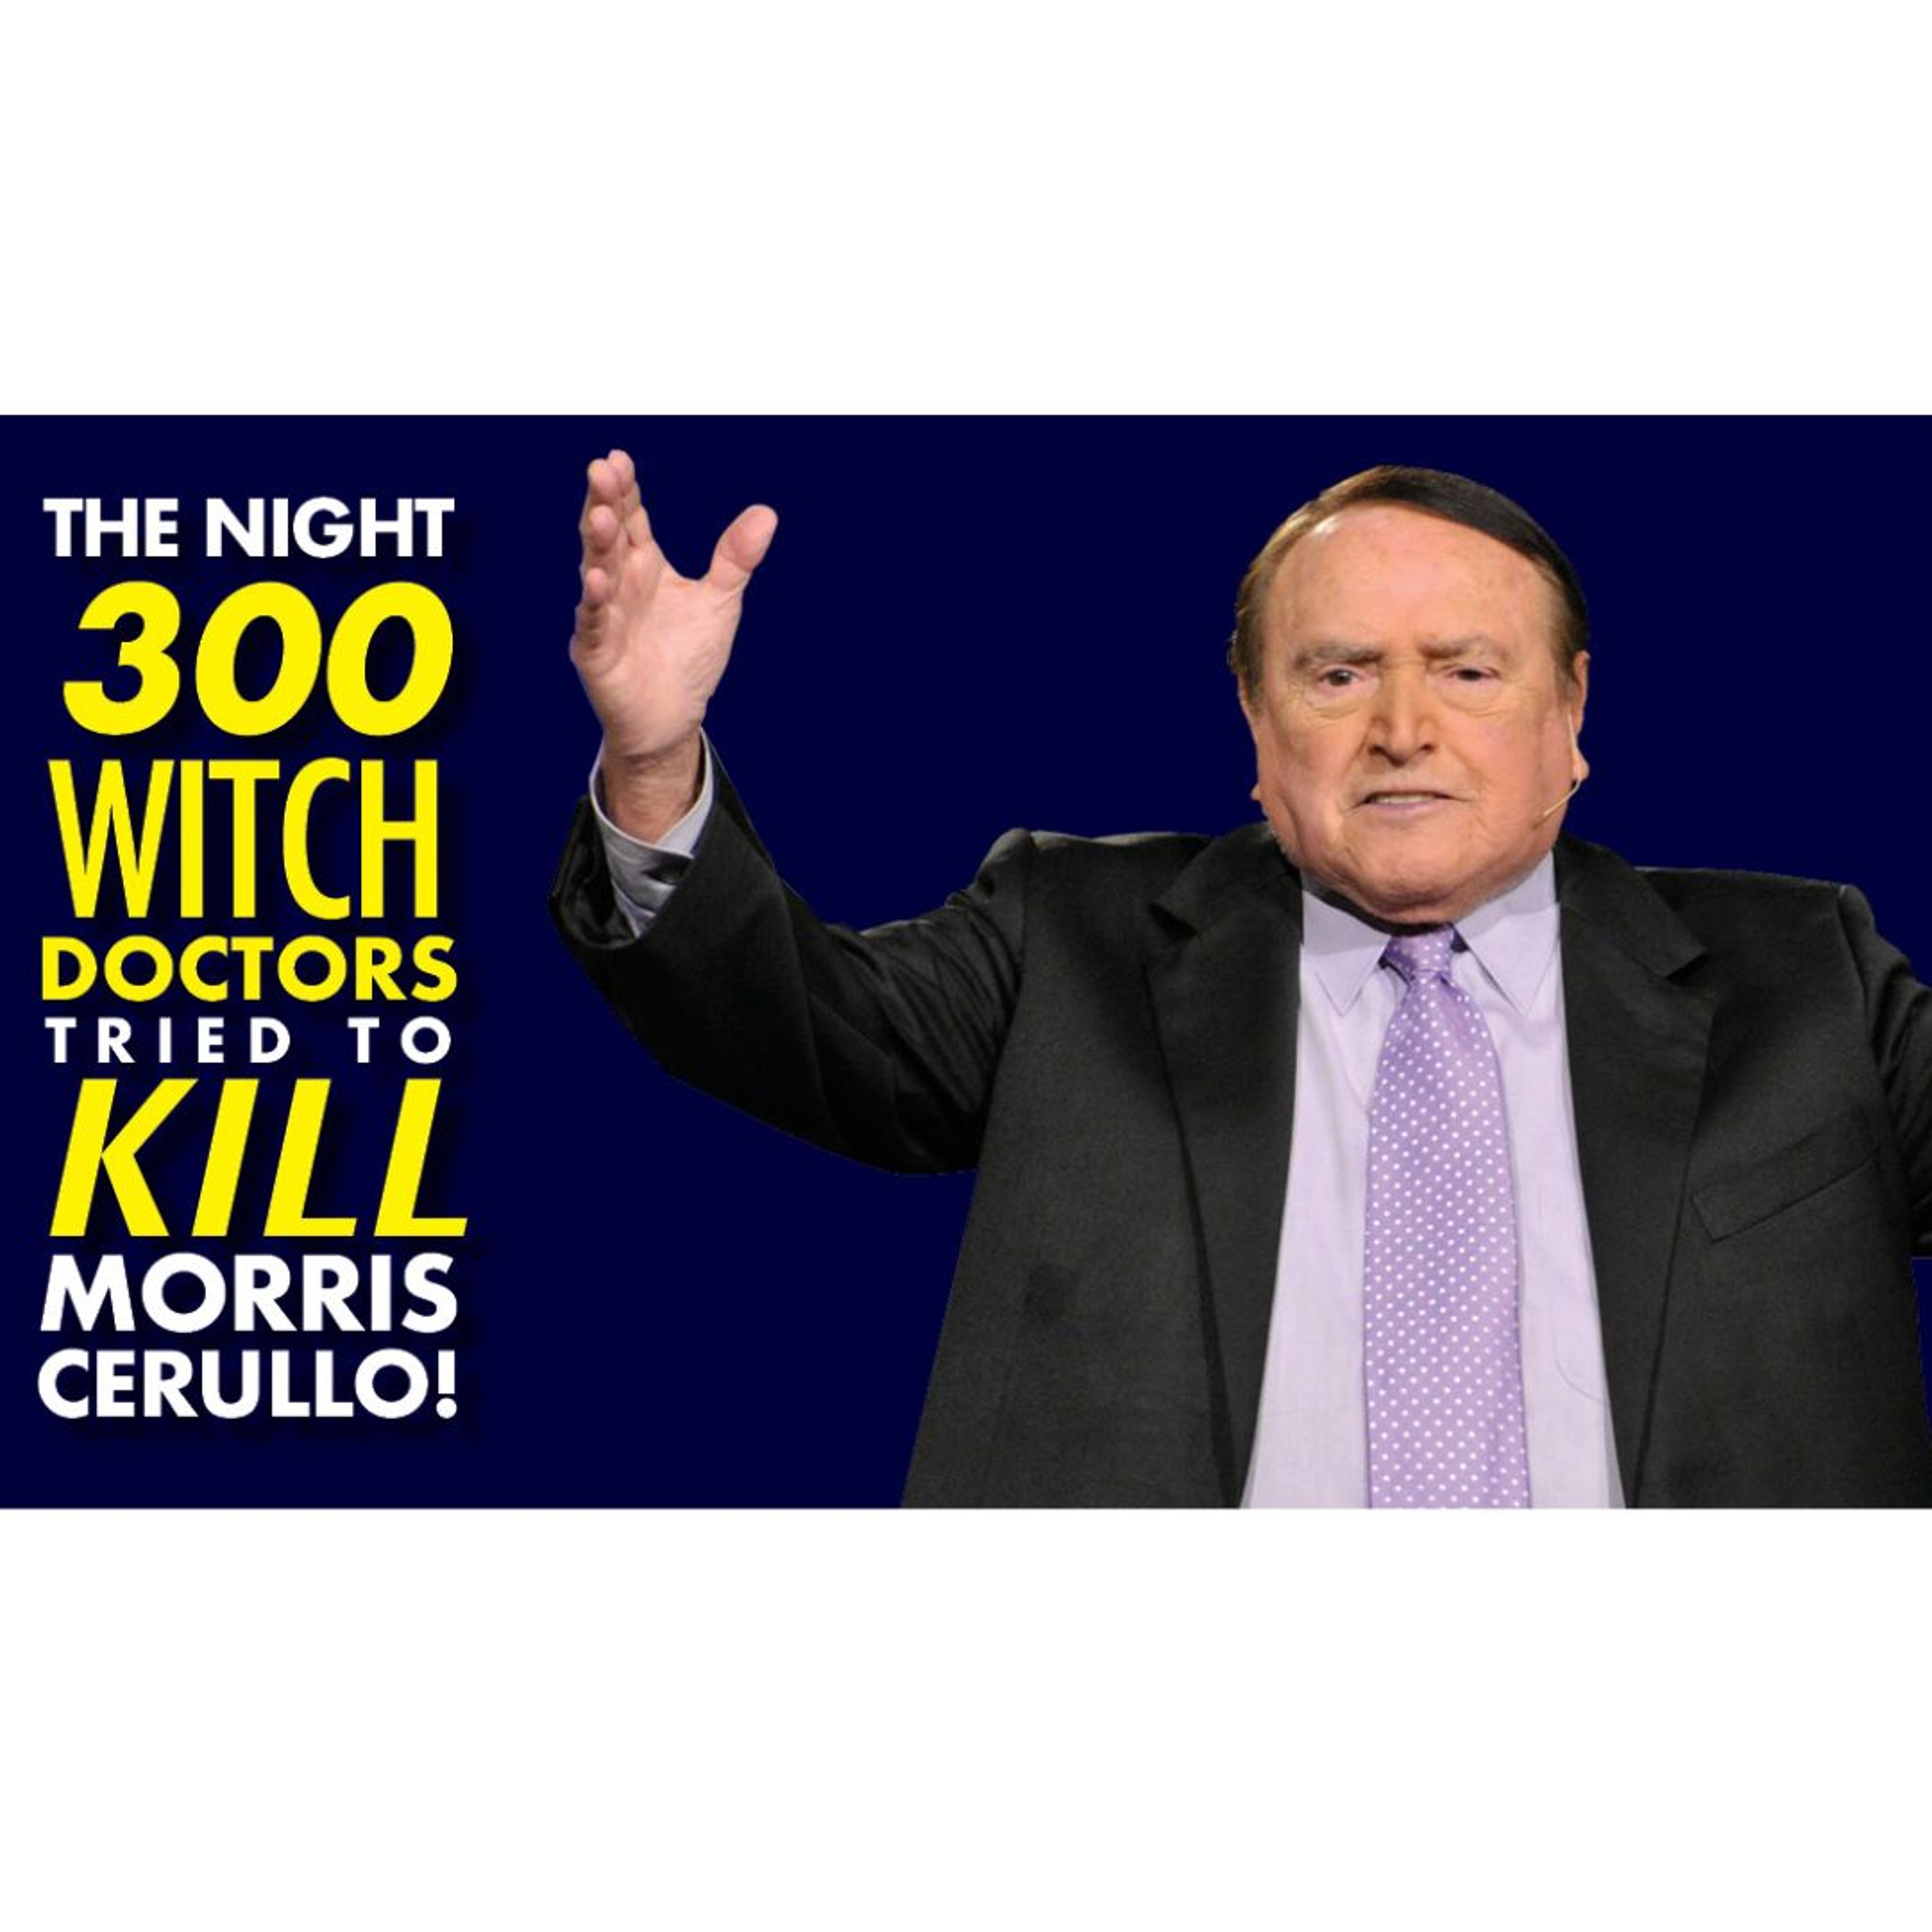 The Night 300 Witch Doctors Tried To Kill Morris Cerullo!